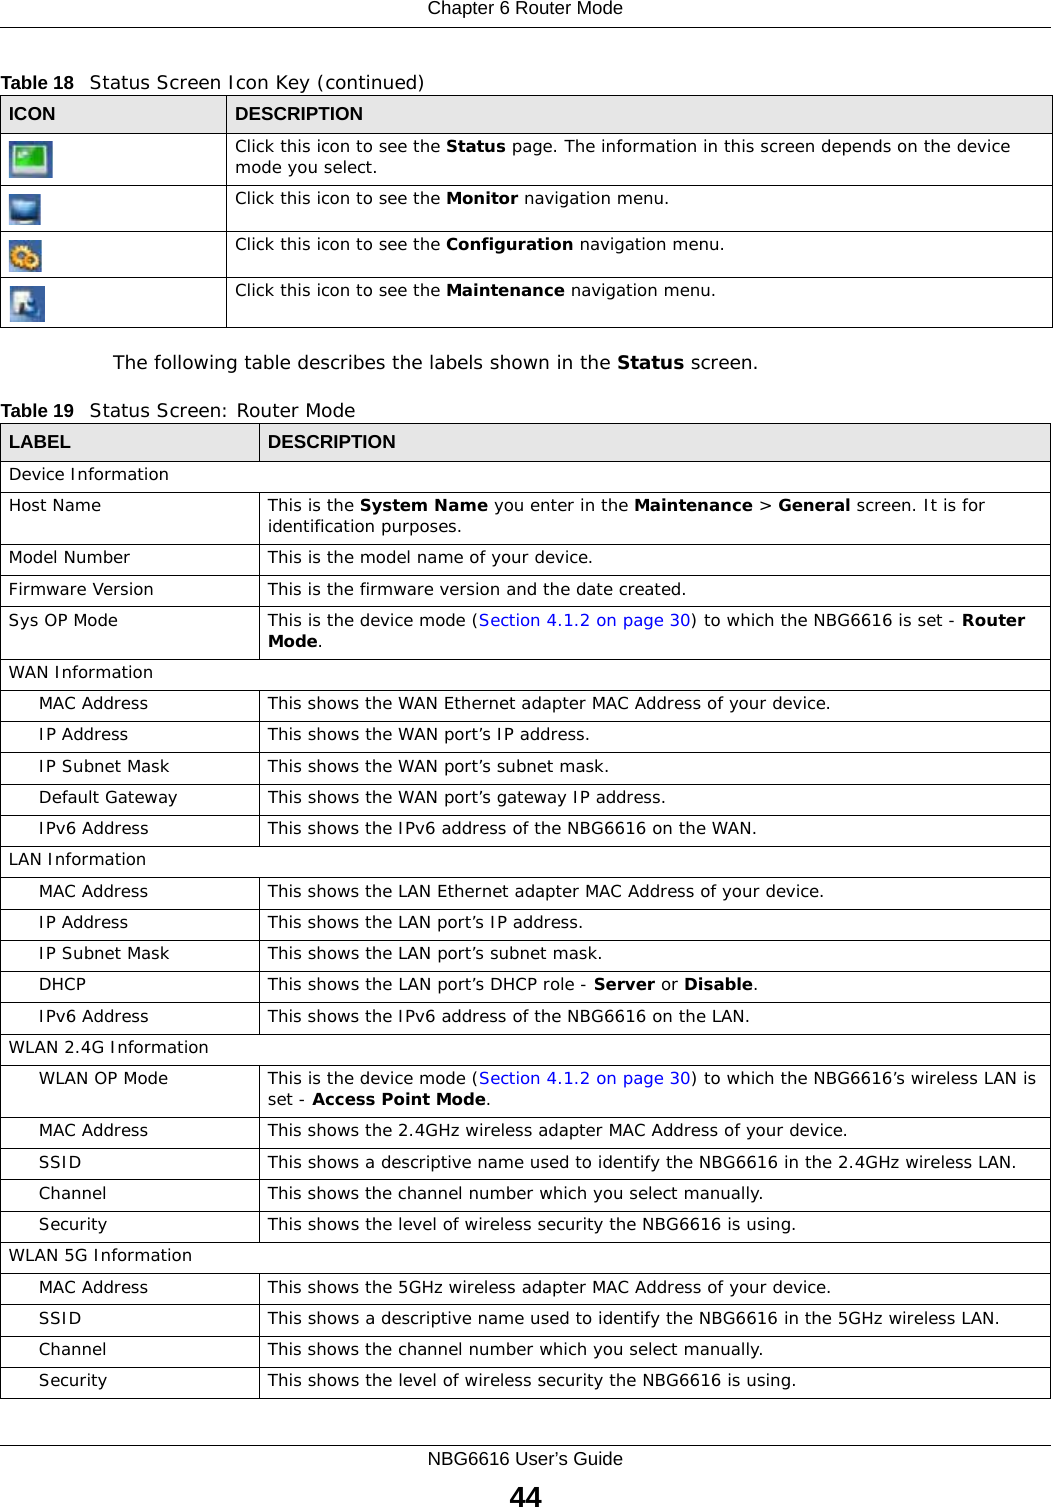 Chapter 6 Router ModeNBG6616 User’s Guide44The following table describes the labels shown in the Status screen.Click this icon to see the Status page. The information in this screen depends on the device mode you select. Click this icon to see the Monitor navigation menu. Click this icon to see the Configuration navigation menu. Click this icon to see the Maintenance navigation menu. Table 18   Status Screen Icon Key (continued)ICON DESCRIPTIONTable 19   Status Screen: Router Mode  LABEL DESCRIPTIONDevice InformationHost Name This is the System Name you enter in the Maintenance &gt; General screen. It is for identification purposes.Model Number This is the model name of your device.Firmware Version This is the firmware version and the date created. Sys OP Mode This is the device mode (Section 4.1.2 on page 30) to which the NBG6616 is set - Router Mode.WAN InformationMAC Address This shows the WAN Ethernet adapter MAC Address of your device.IP Address This shows the WAN port’s IP address.IP Subnet Mask This shows the WAN port’s subnet mask.Default Gateway This shows the WAN port’s gateway IP address.IPv6 Address This shows the IPv6 address of the NBG6616 on the WAN.LAN InformationMAC Address This shows the LAN Ethernet adapter MAC Address of your device.IP Address This shows the LAN port’s IP address.IP Subnet Mask This shows the LAN port’s subnet mask.DHCP This shows the LAN port’s DHCP role - Server or Disable.IPv6 Address This shows the IPv6 address of the NBG6616 on the LAN.WLAN 2.4G InformationWLAN OP Mode This is the device mode (Section 4.1.2 on page 30) to which the NBG6616’s wireless LAN is set - Access Point Mode.MAC Address This shows the 2.4GHz wireless adapter MAC Address of your device.SSID This shows a descriptive name used to identify the NBG6616 in the 2.4GHz wireless LAN. Channel This shows the channel number which you select manually.Security This shows the level of wireless security the NBG6616 is using.WLAN 5G InformationMAC Address This shows the 5GHz wireless adapter MAC Address of your device.SSID This shows a descriptive name used to identify the NBG6616 in the 5GHz wireless LAN. Channel This shows the channel number which you select manually.Security This shows the level of wireless security the NBG6616 is using.